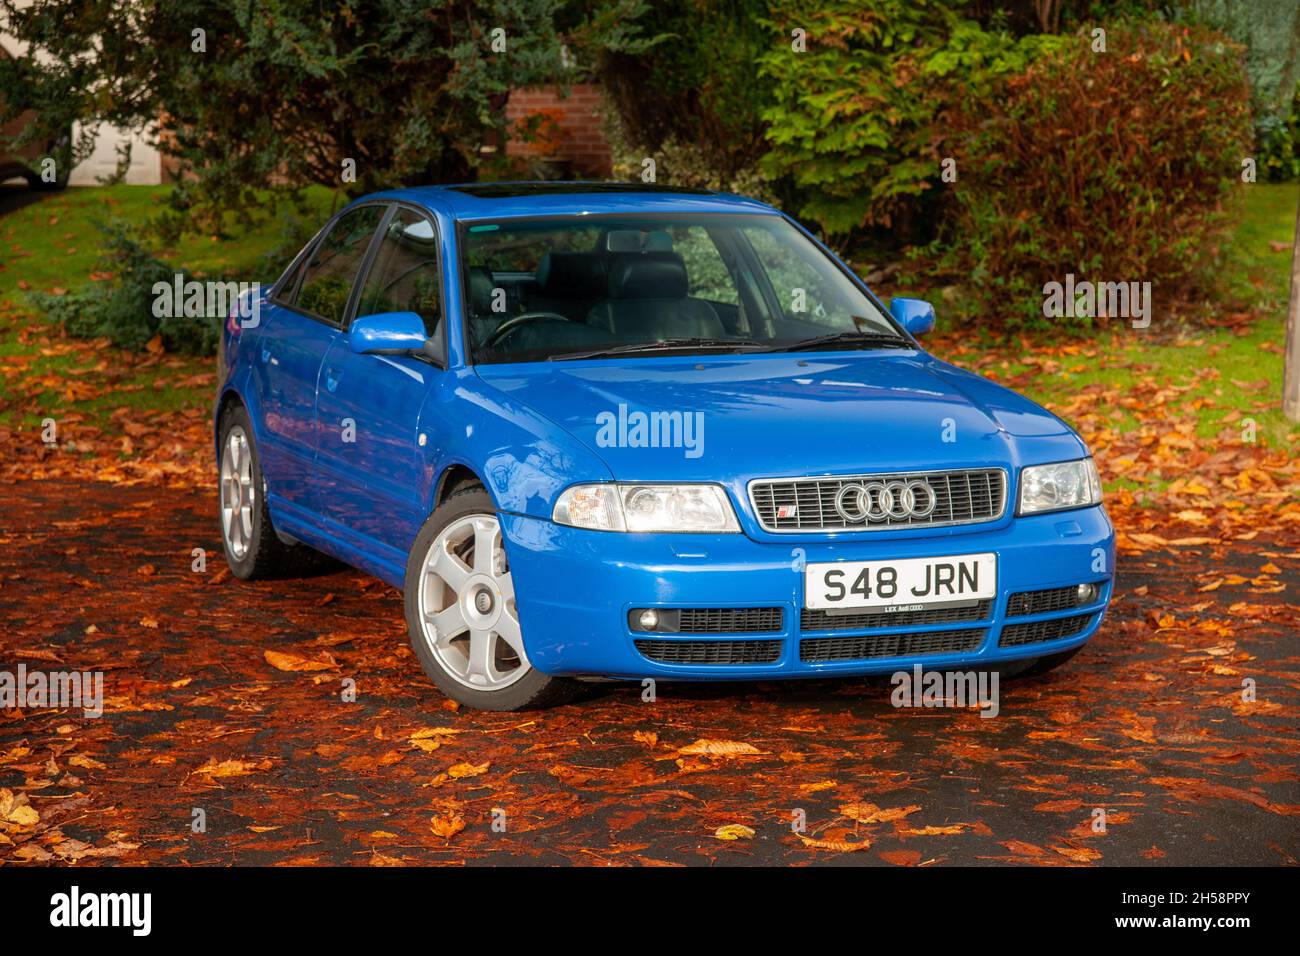 1999 model year Audi S4 saloon parked on a leaf strewn suburban street in early Autumn Stock Photo